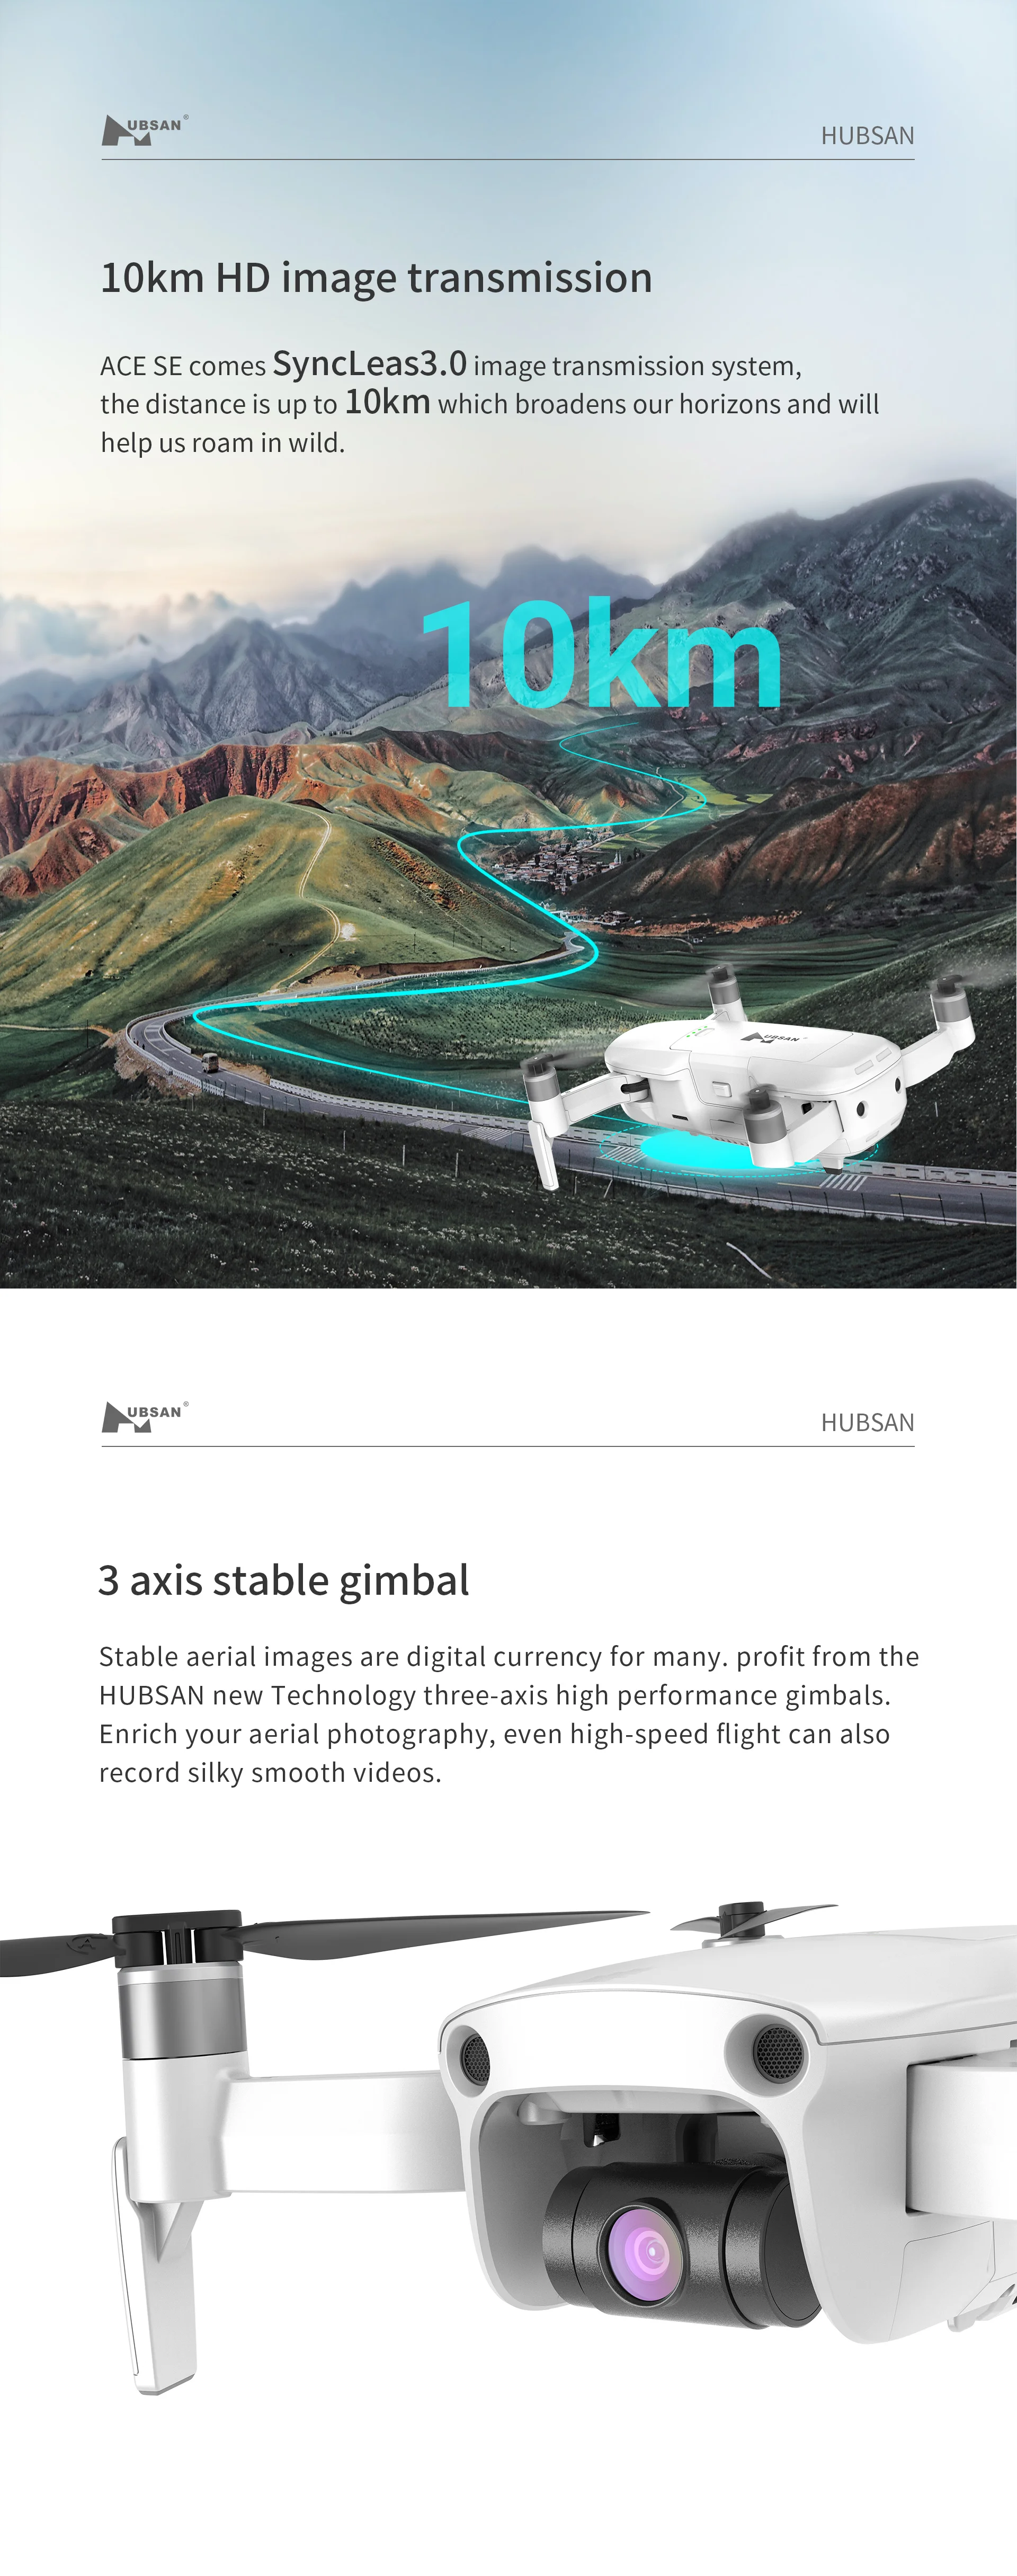 UBSAN HUBSAN 10km HD image transmission ACE SE comes SyncLea